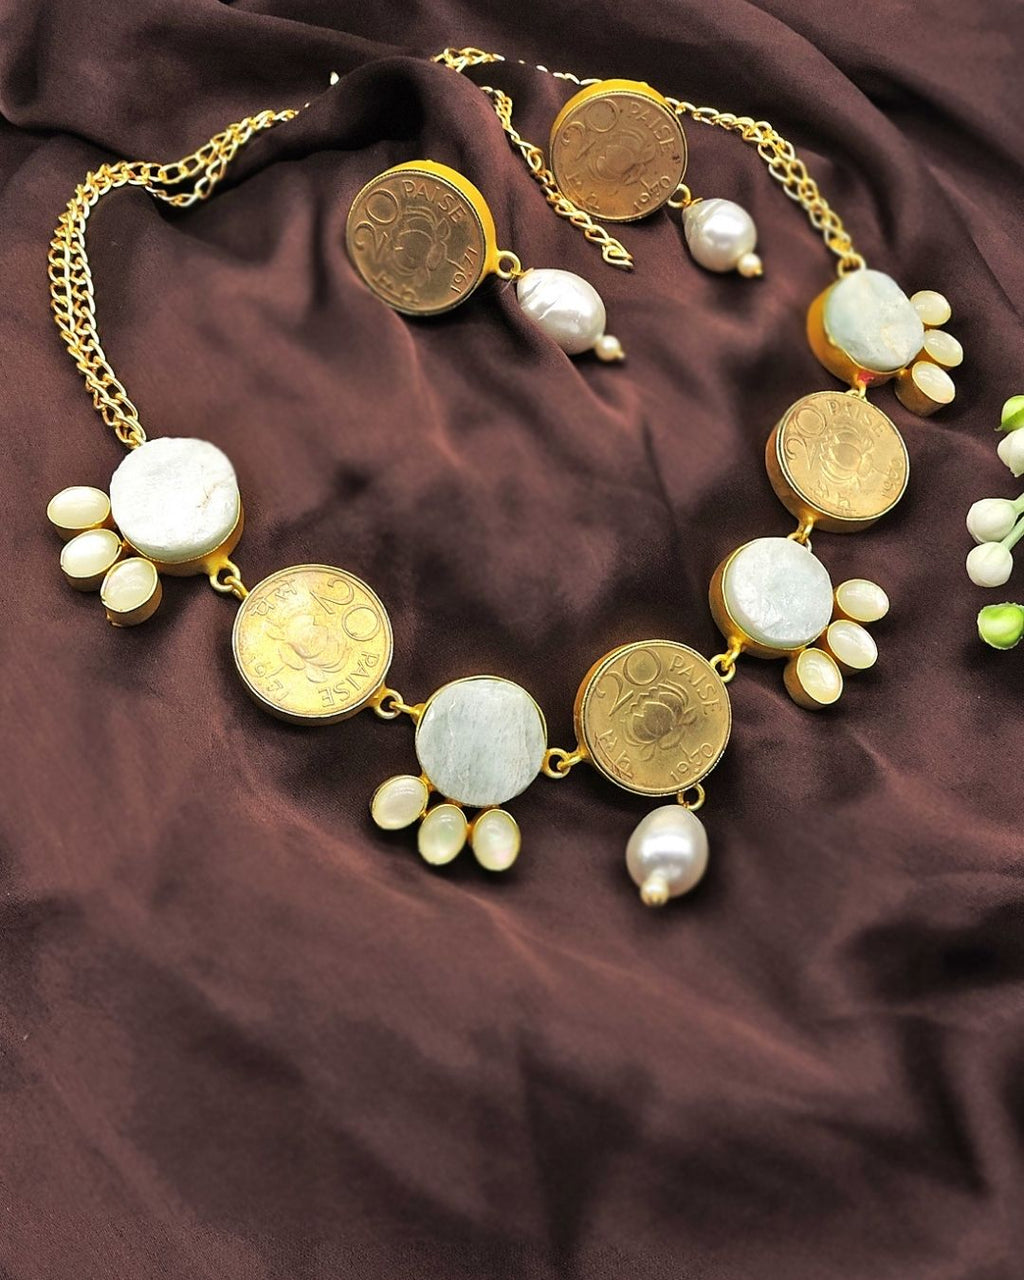 Coin & Amazonite Necklace - Necklaces - Handcrafted Jewellery - Made in India - Dubai Jewellery, Fashion & Lifestyle - Dori